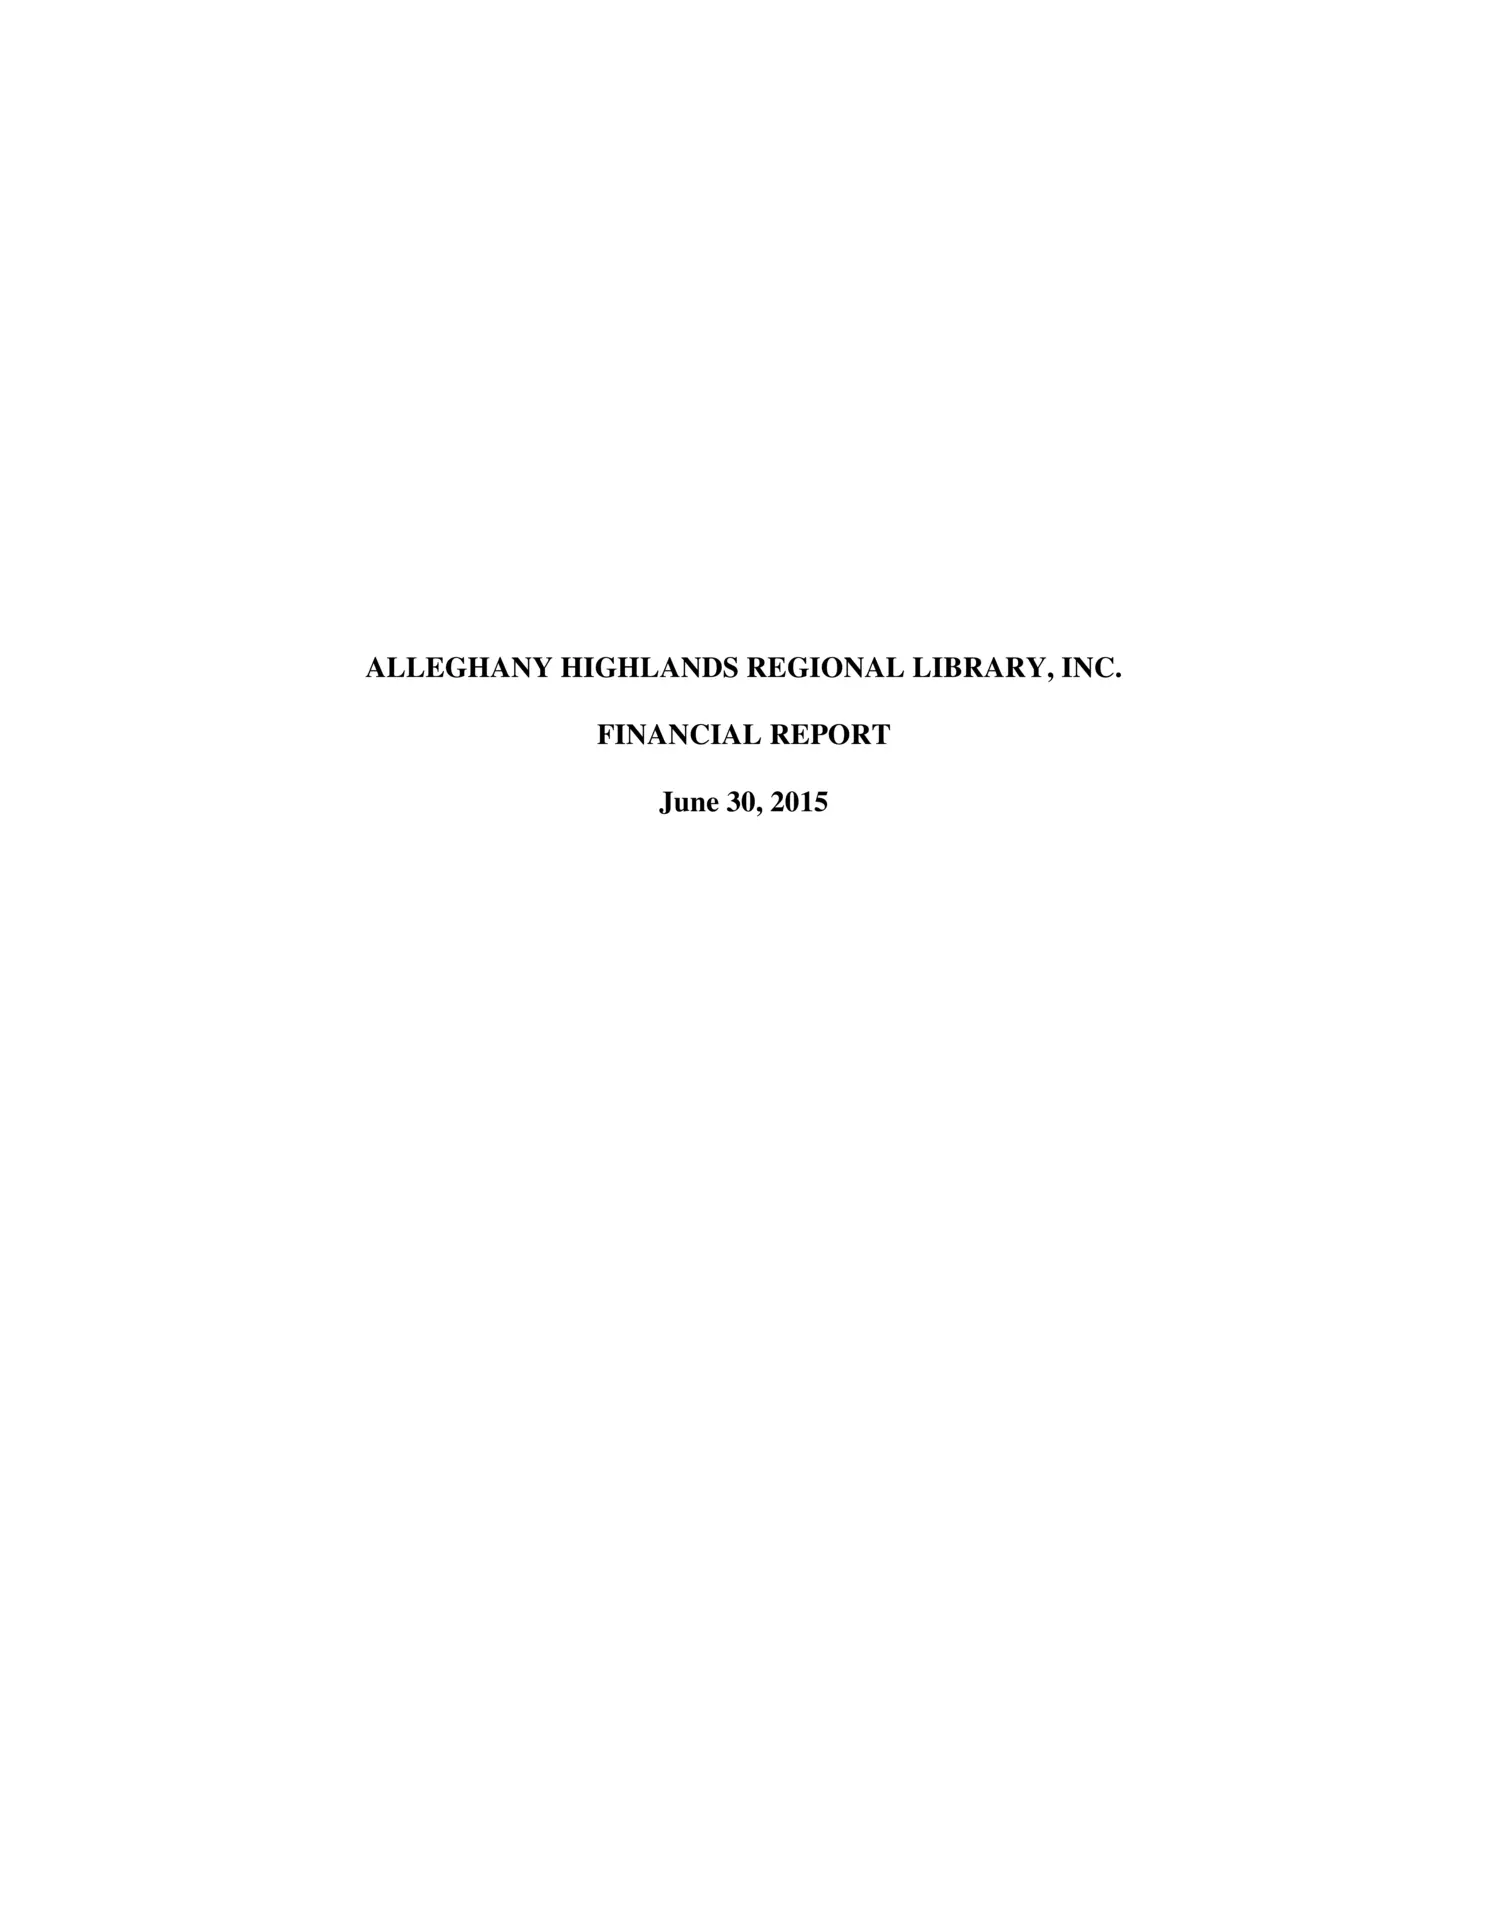 2015 ABC/Other Annual Financial Report  for Alleghany Highlands Regional Library